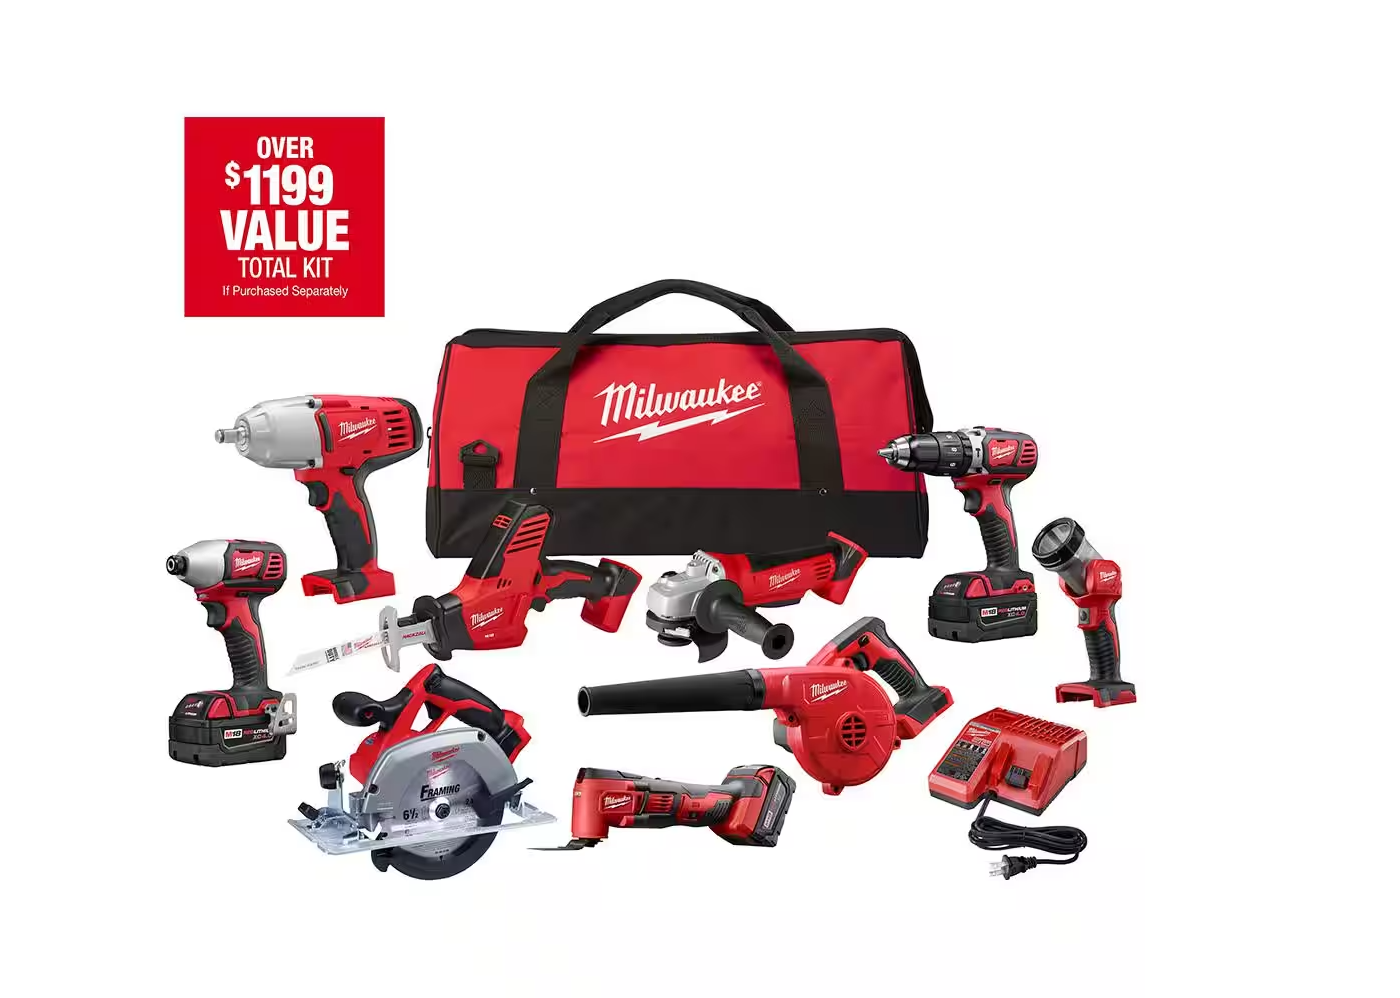 M18 18V Lithium-Ion Cordless Tool Kit (9-Tool) with (3) 4.0 Ah Batteries, Charger, Bag ($600 off)